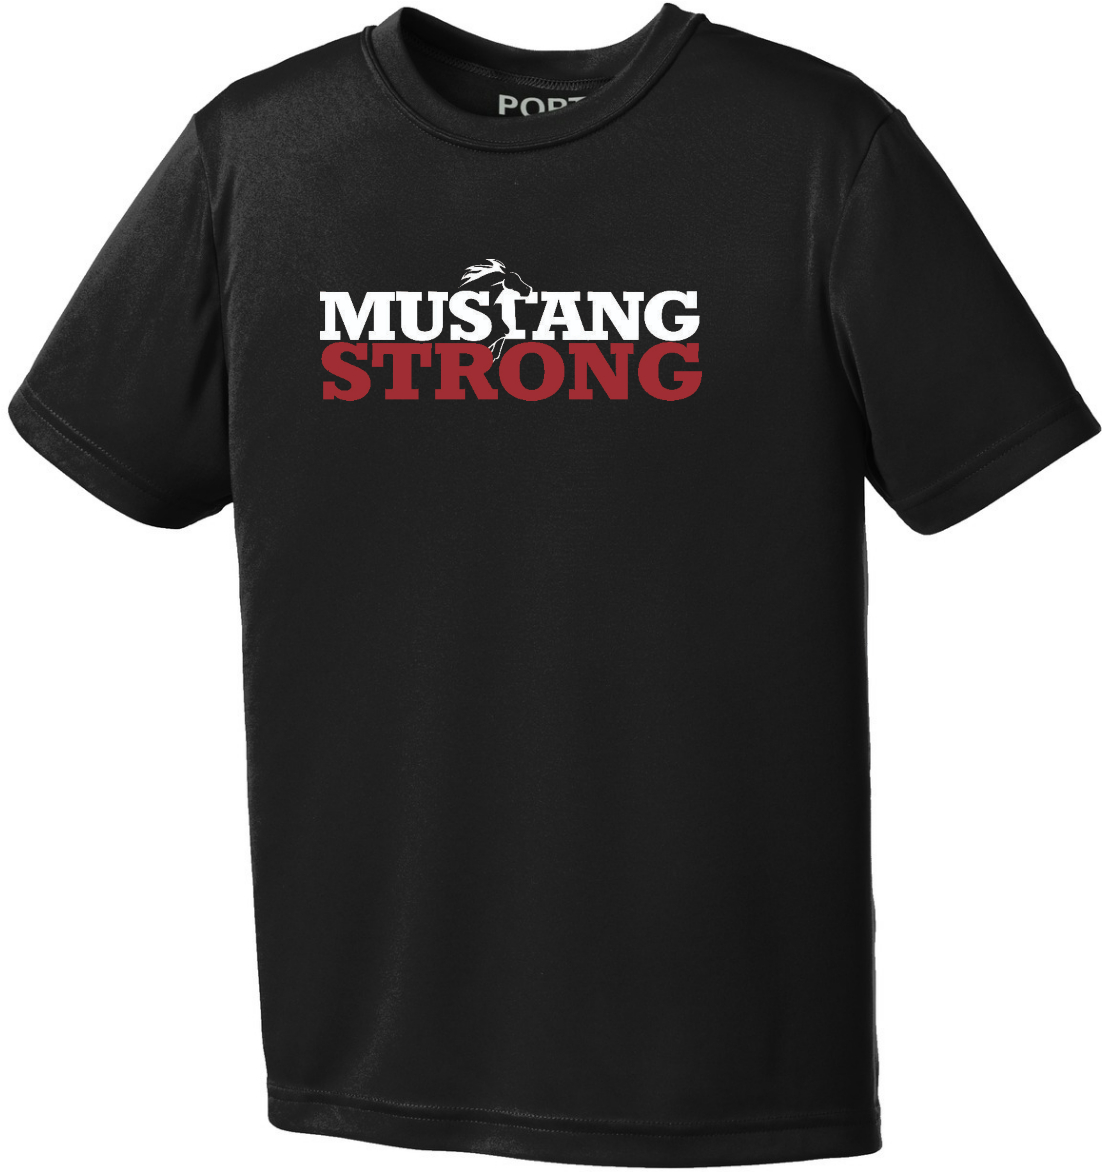 PC380Y Black STRONG Dri-fit Youth